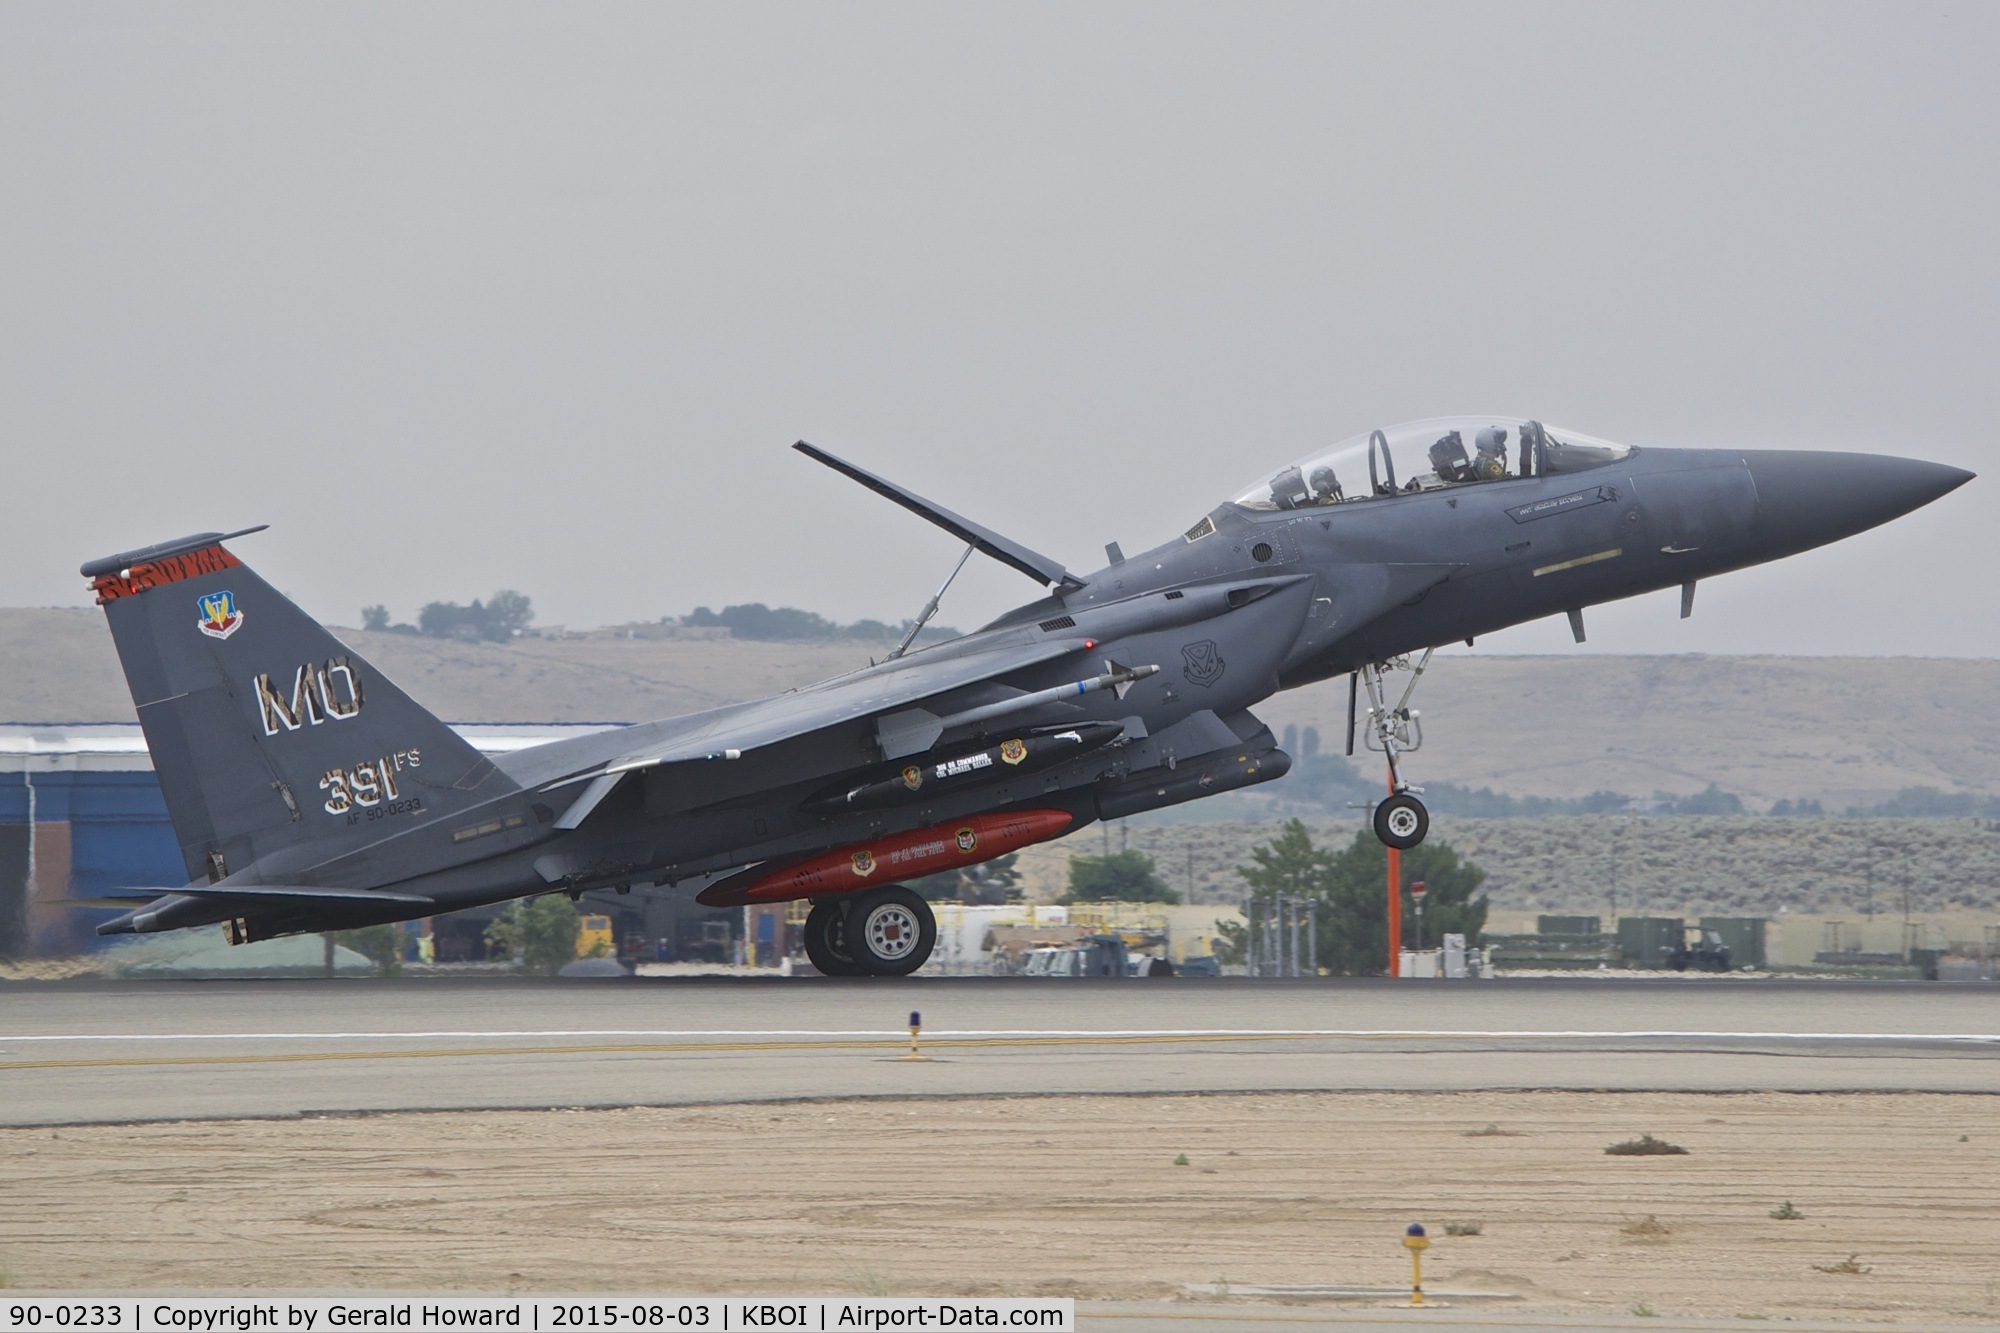 90-0233, 1990 McDonnell Douglas F-15E Strike Eagle C/N 1163/E135, Landing roll out on RWY 28R.  391st Fighter Sq., 